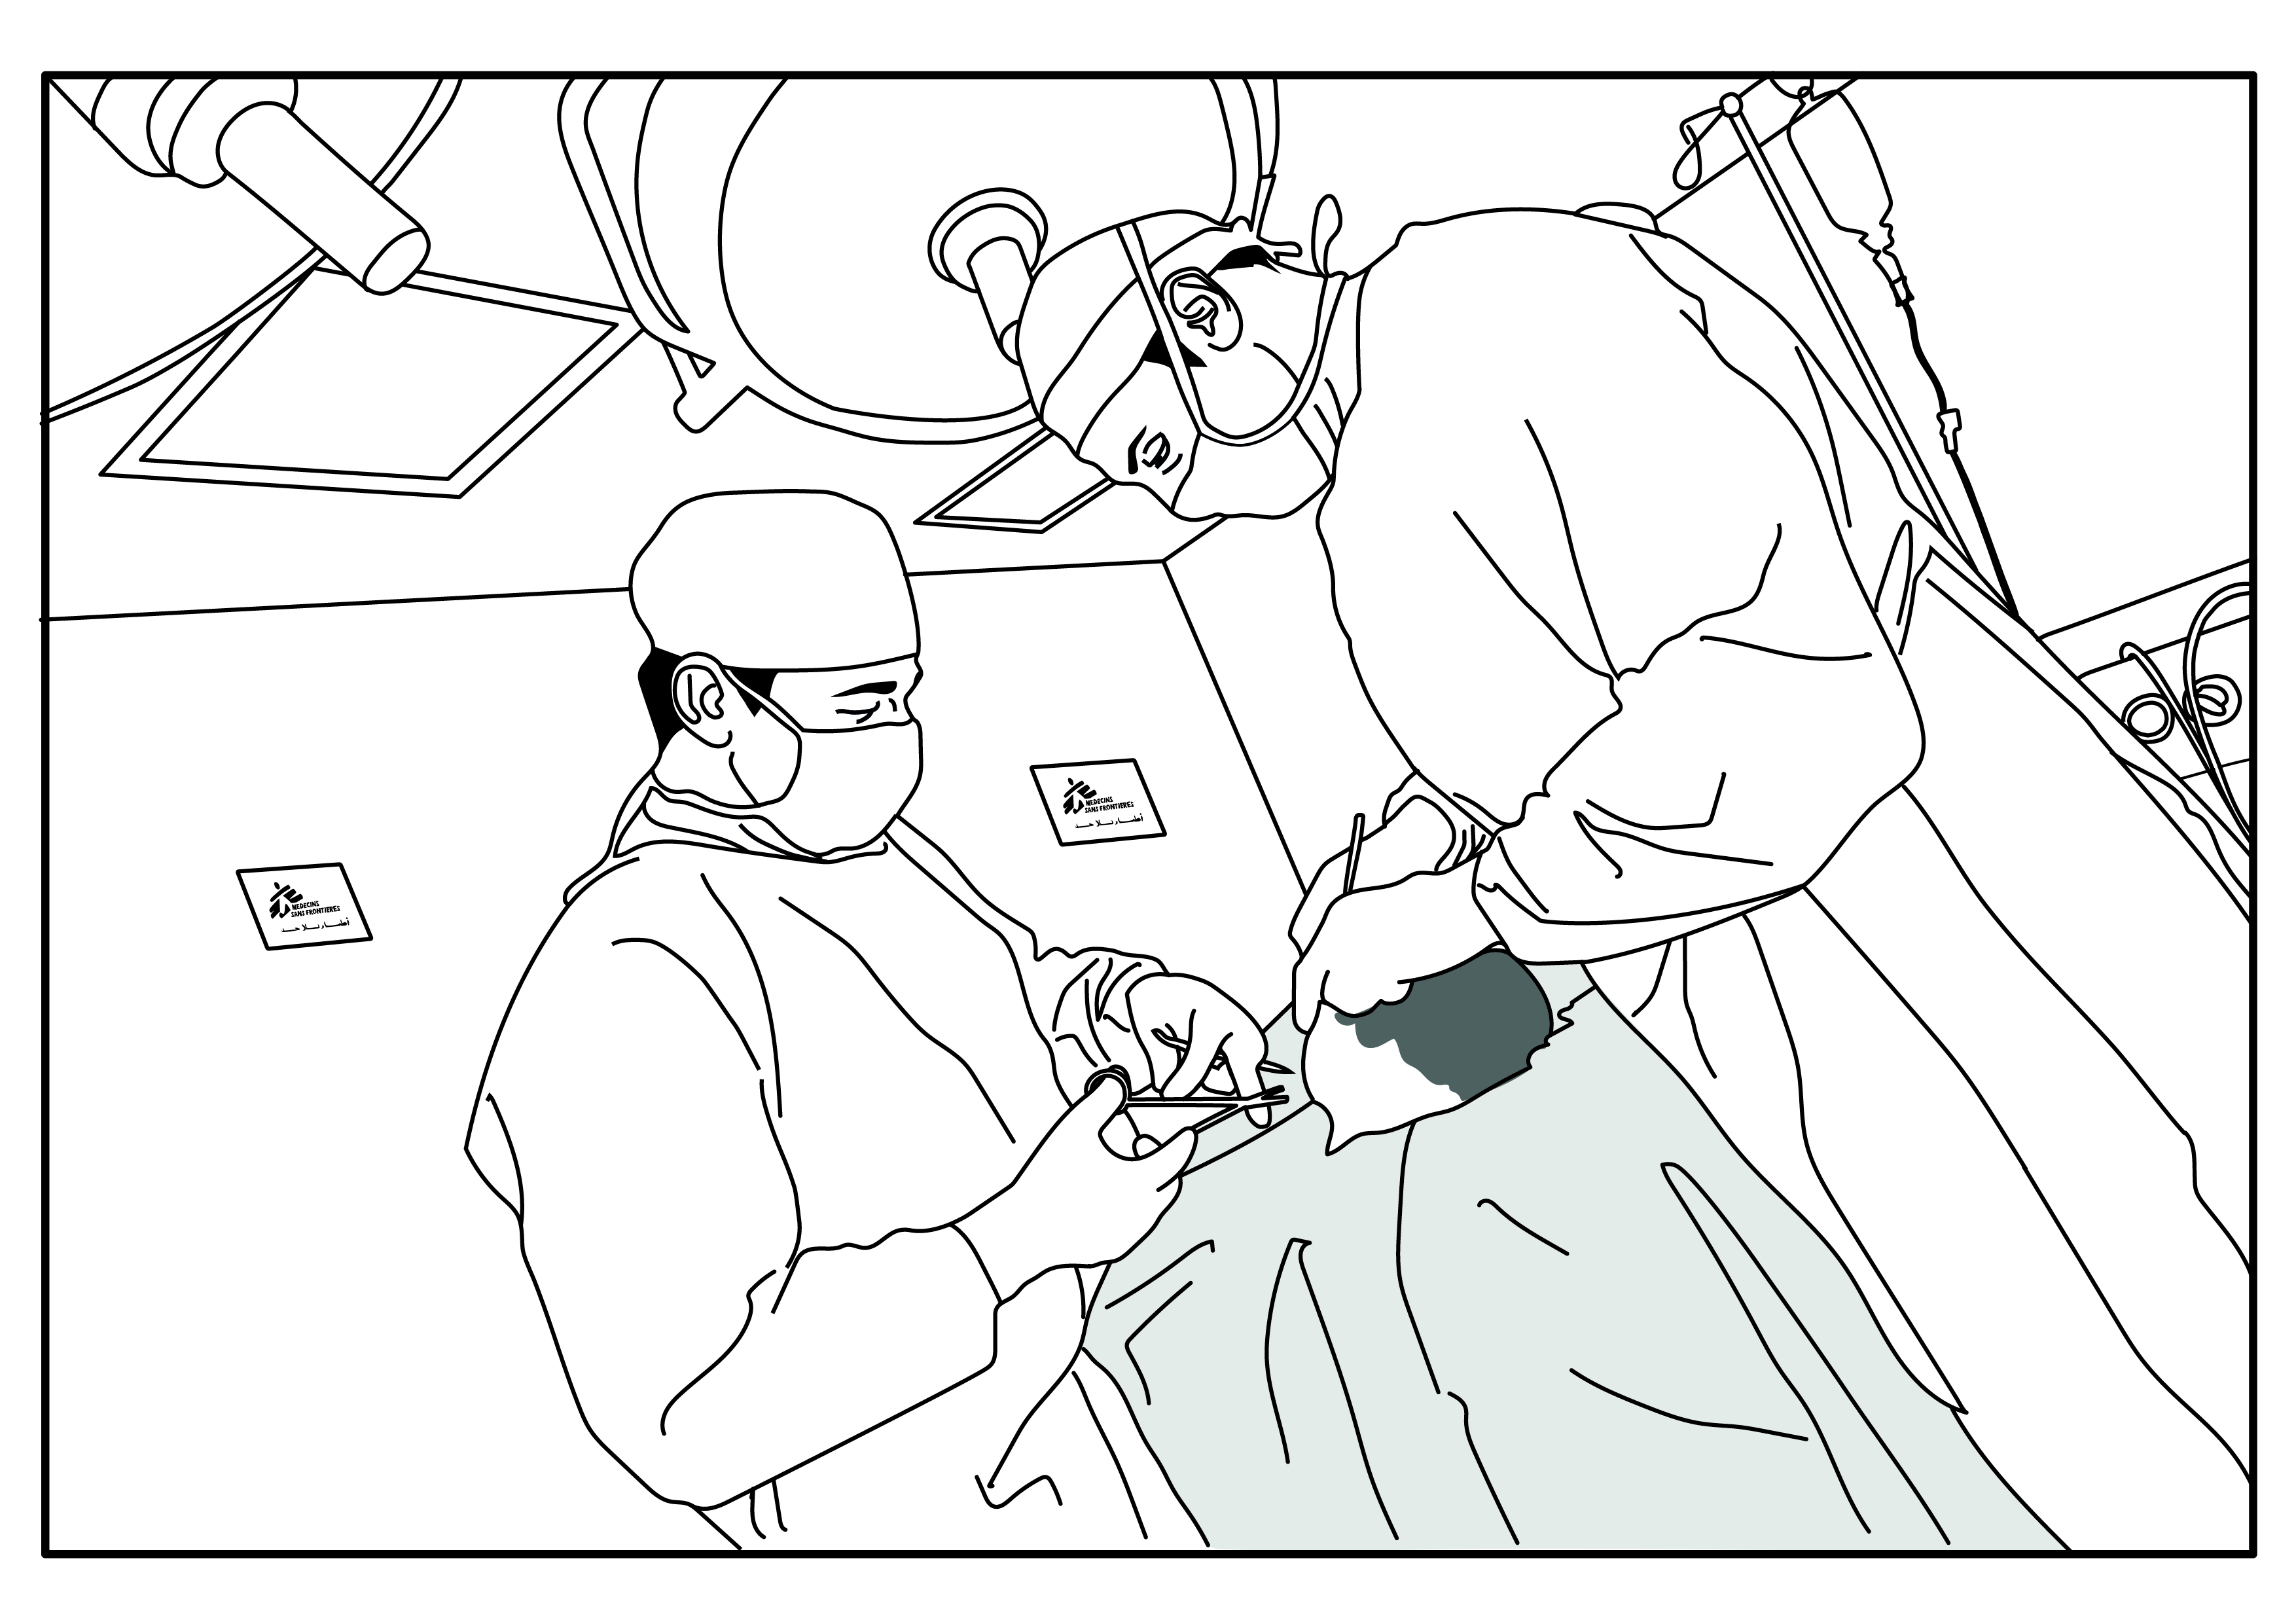 In the operating theatre